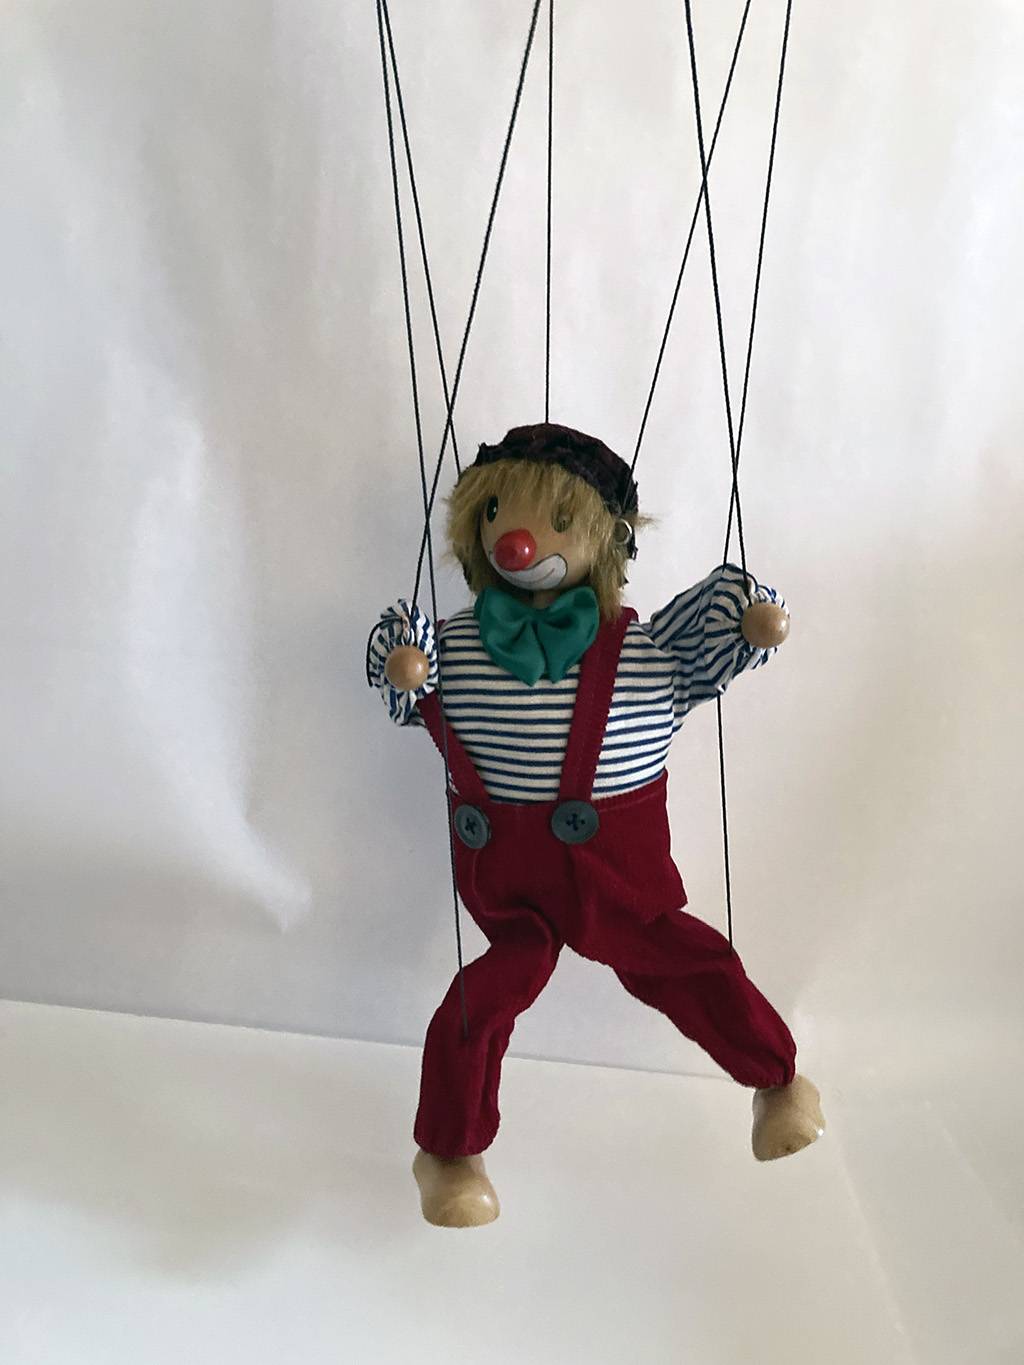 A toy marionette